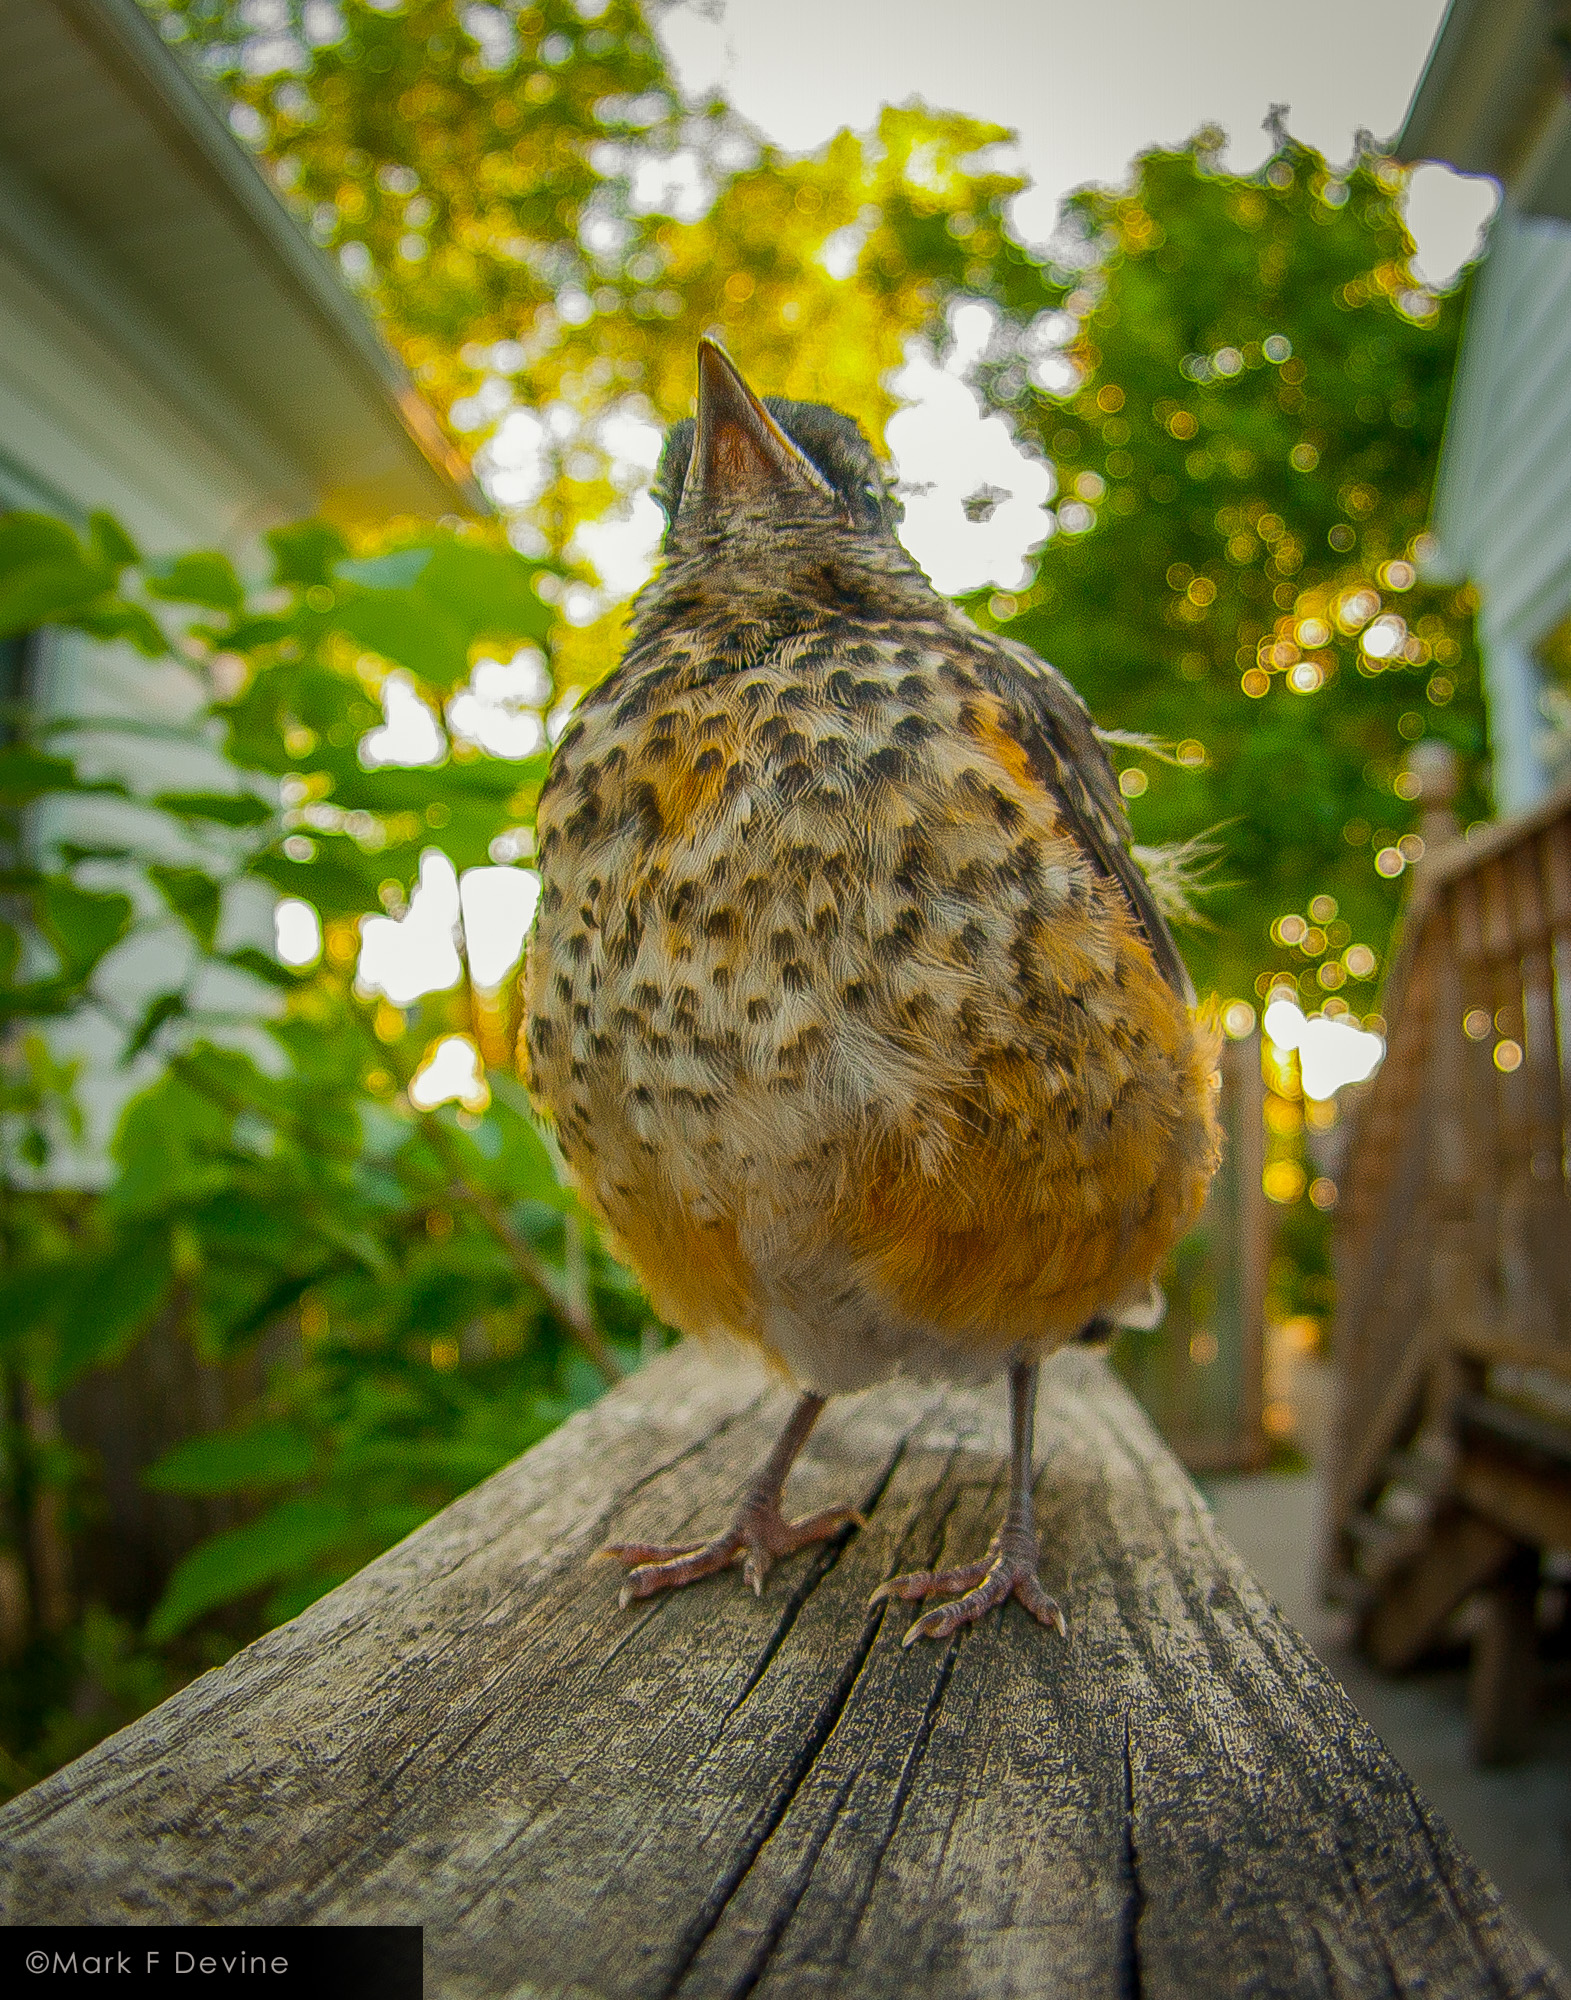 Young Robin posing for a close-up.